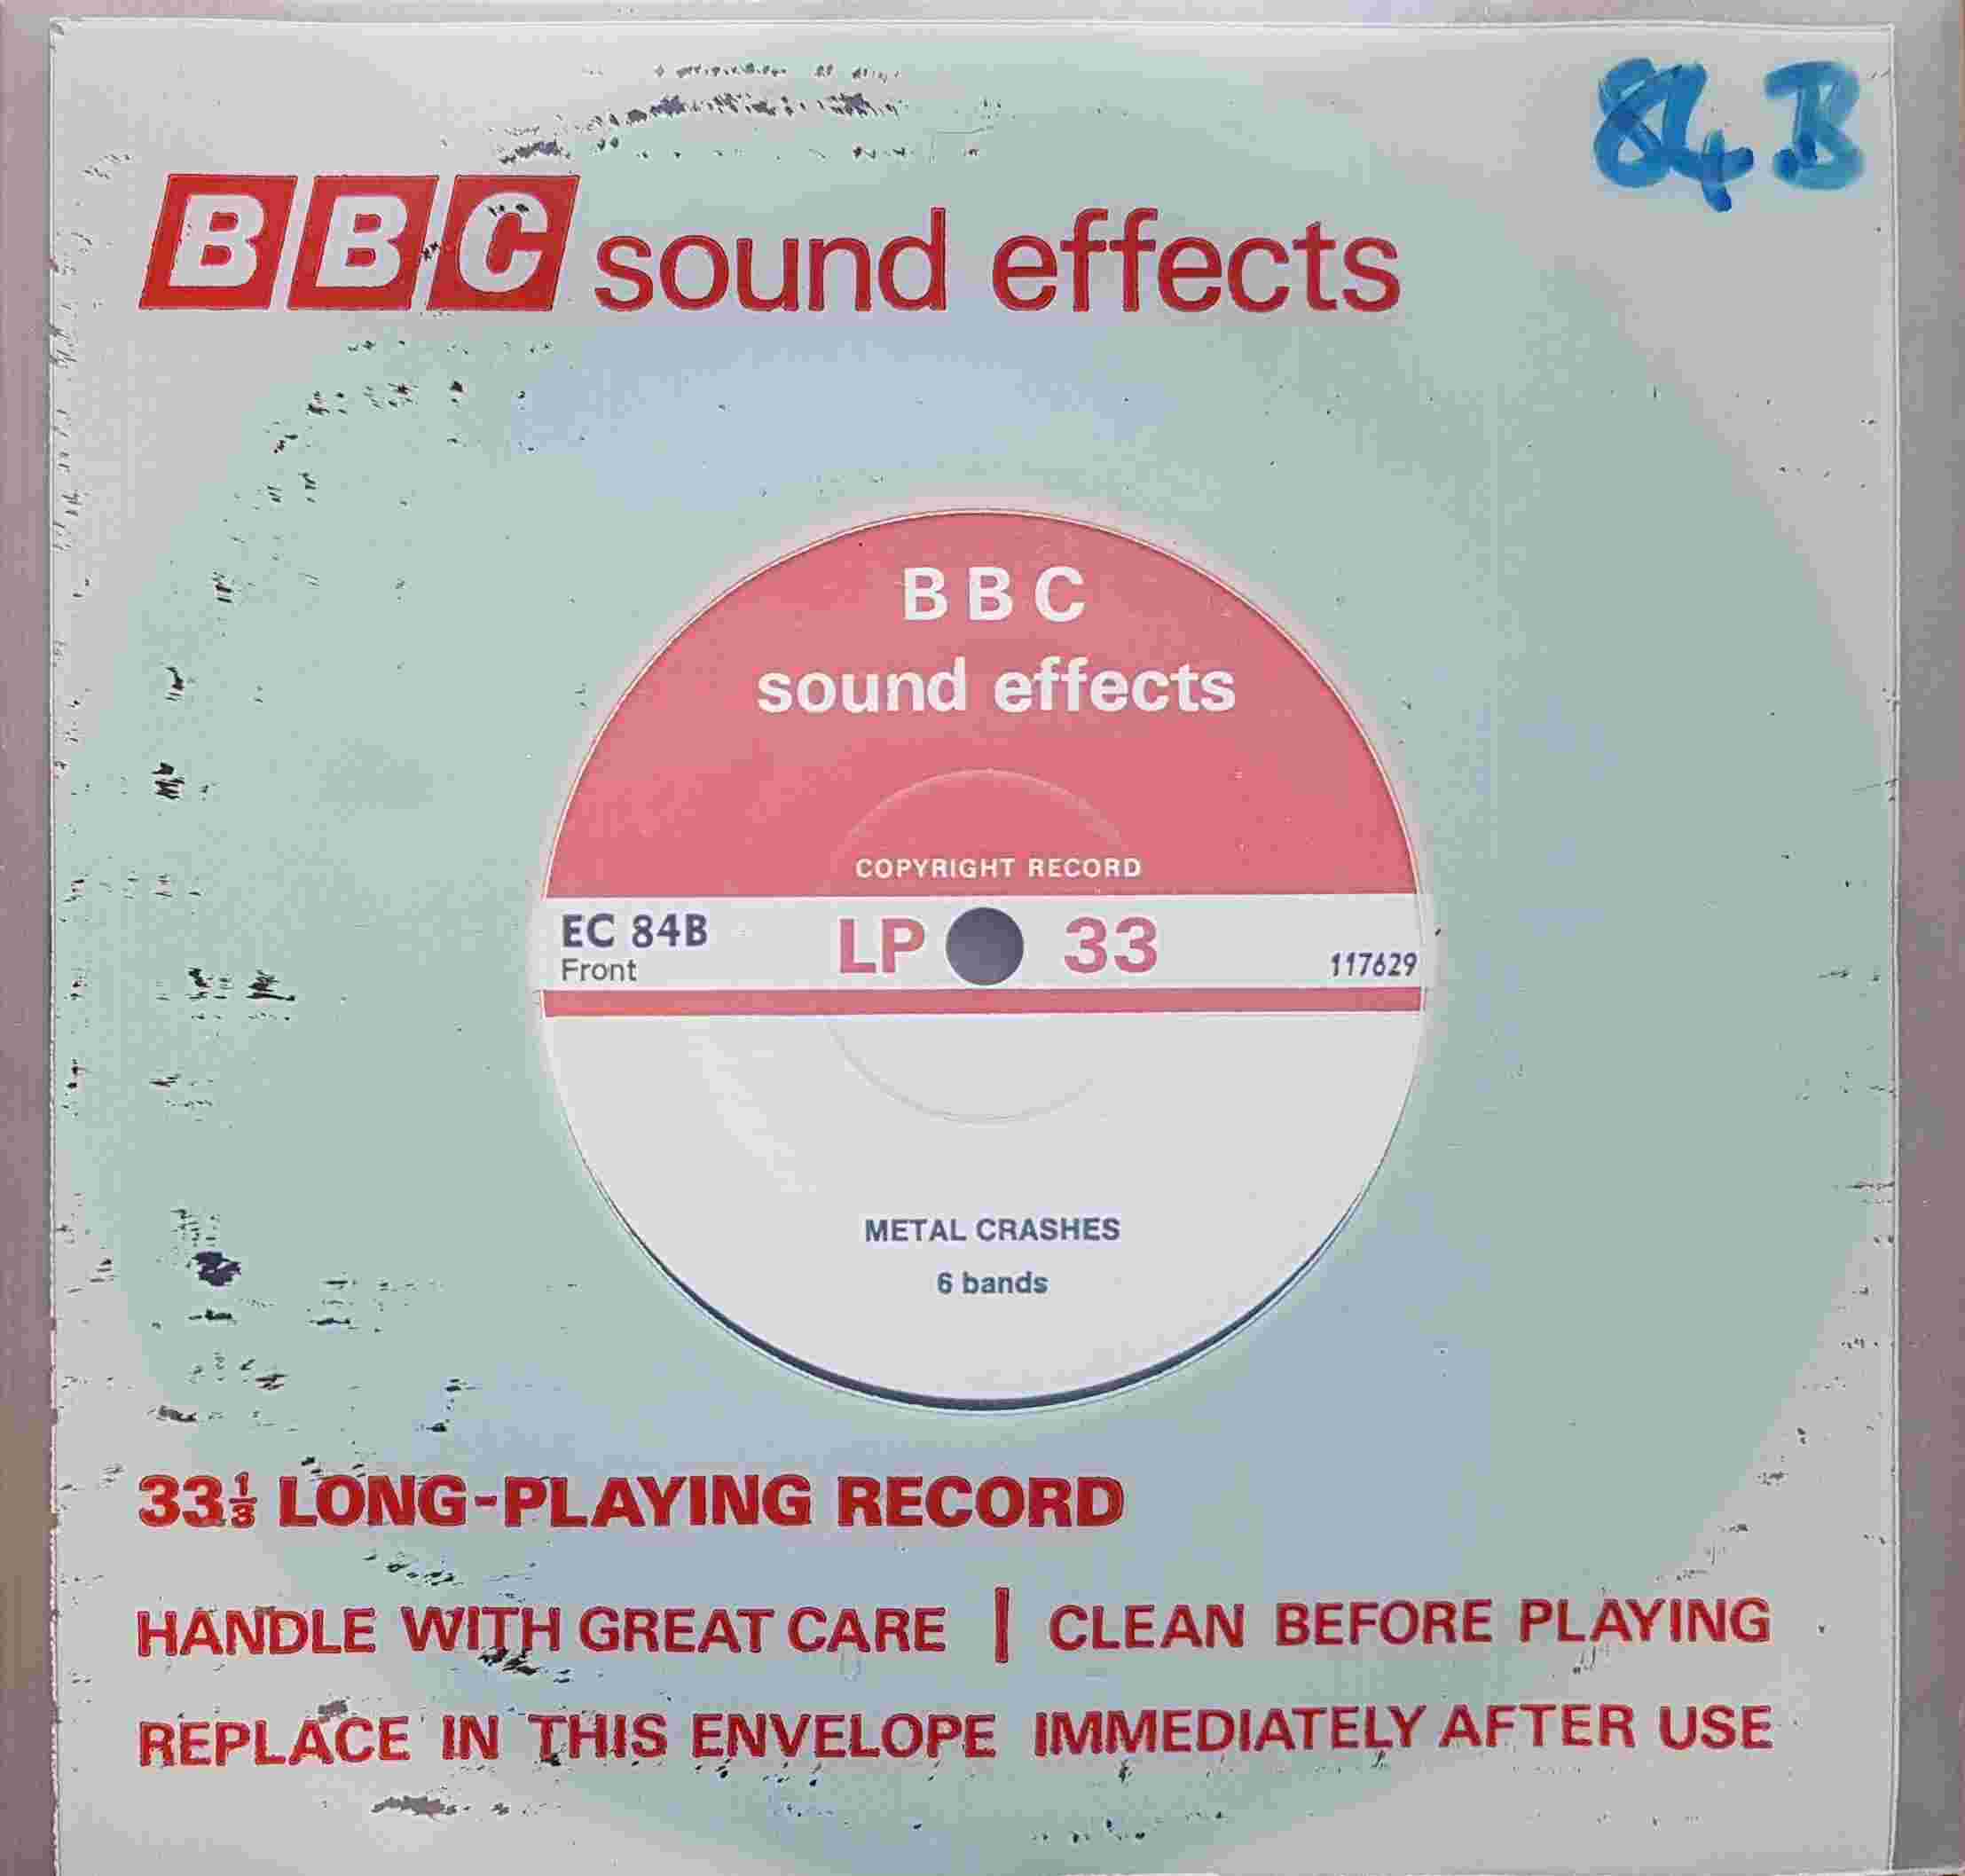 Picture of EC 84B Metal crashes by artist Not registered from the BBC singles - Records and Tapes library